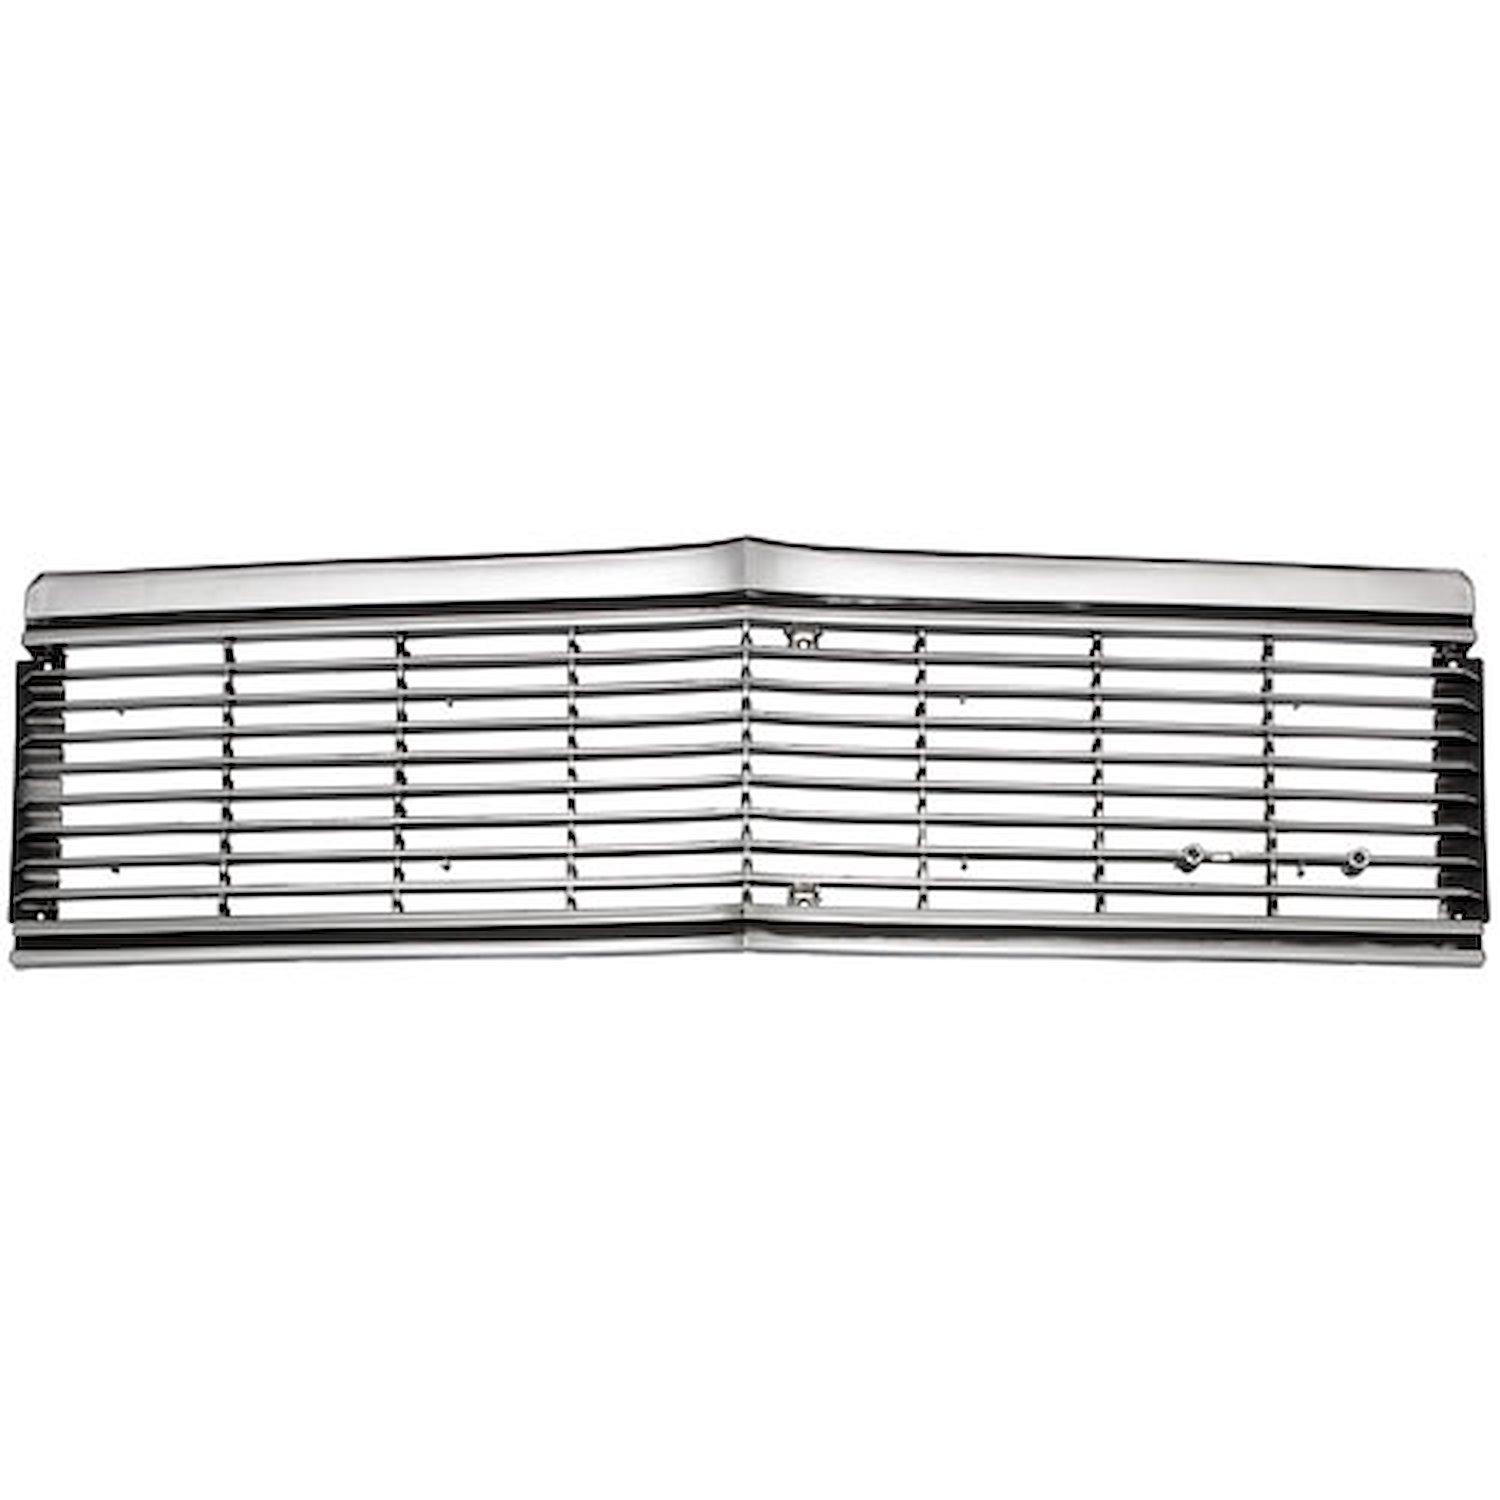 Grille for 1981 Chevy Chevelle, El Camino [Chrome